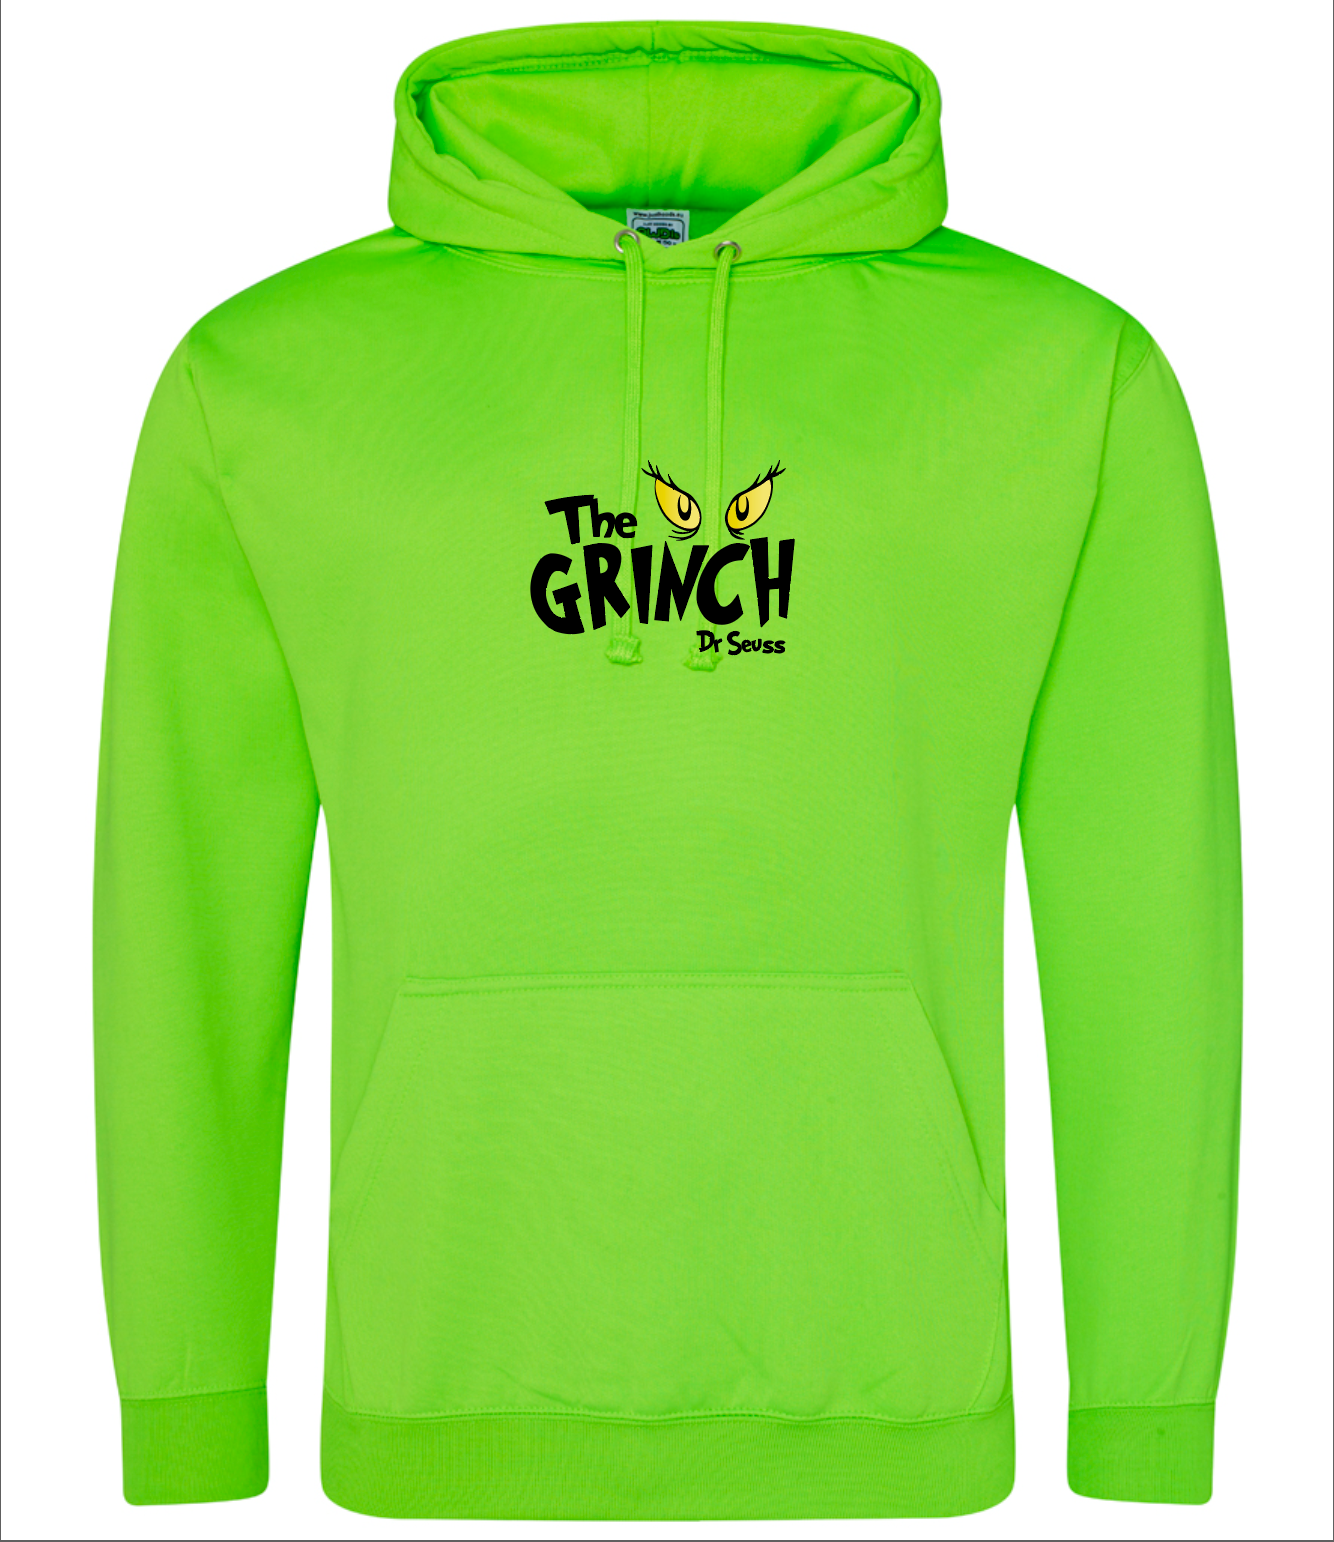 Grinch style Hoodie